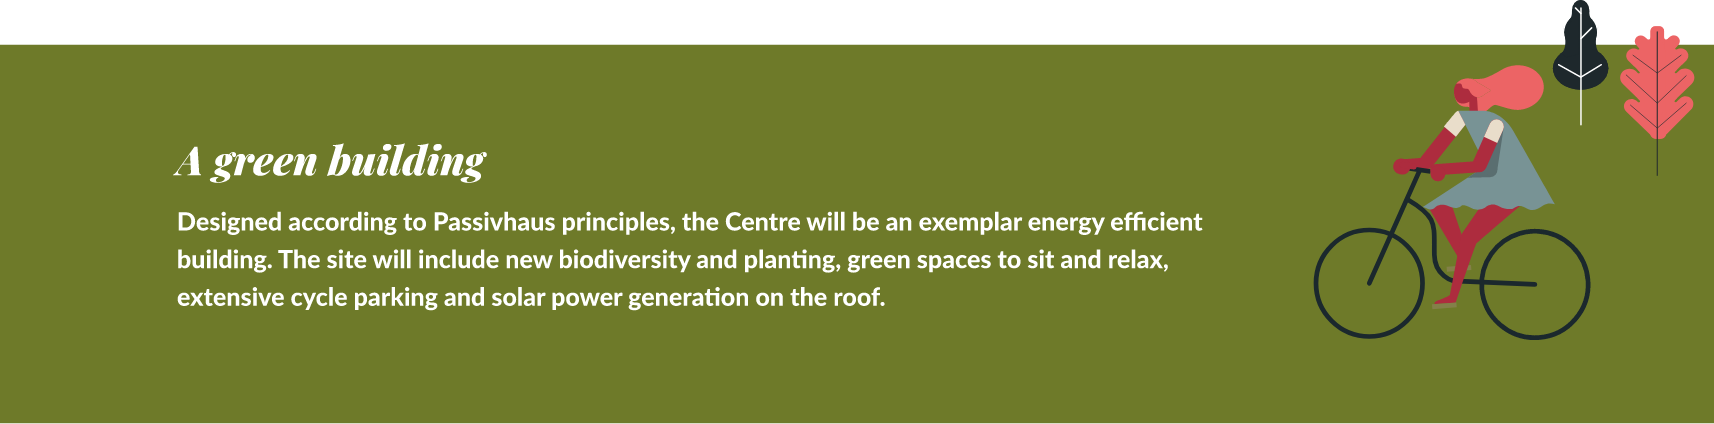 A green building. Designed according to Passivhaus principles, the site will include new biodiversity and planting, green spaces to sit and relax, extensive cycle parking and solar power generation on the roof.